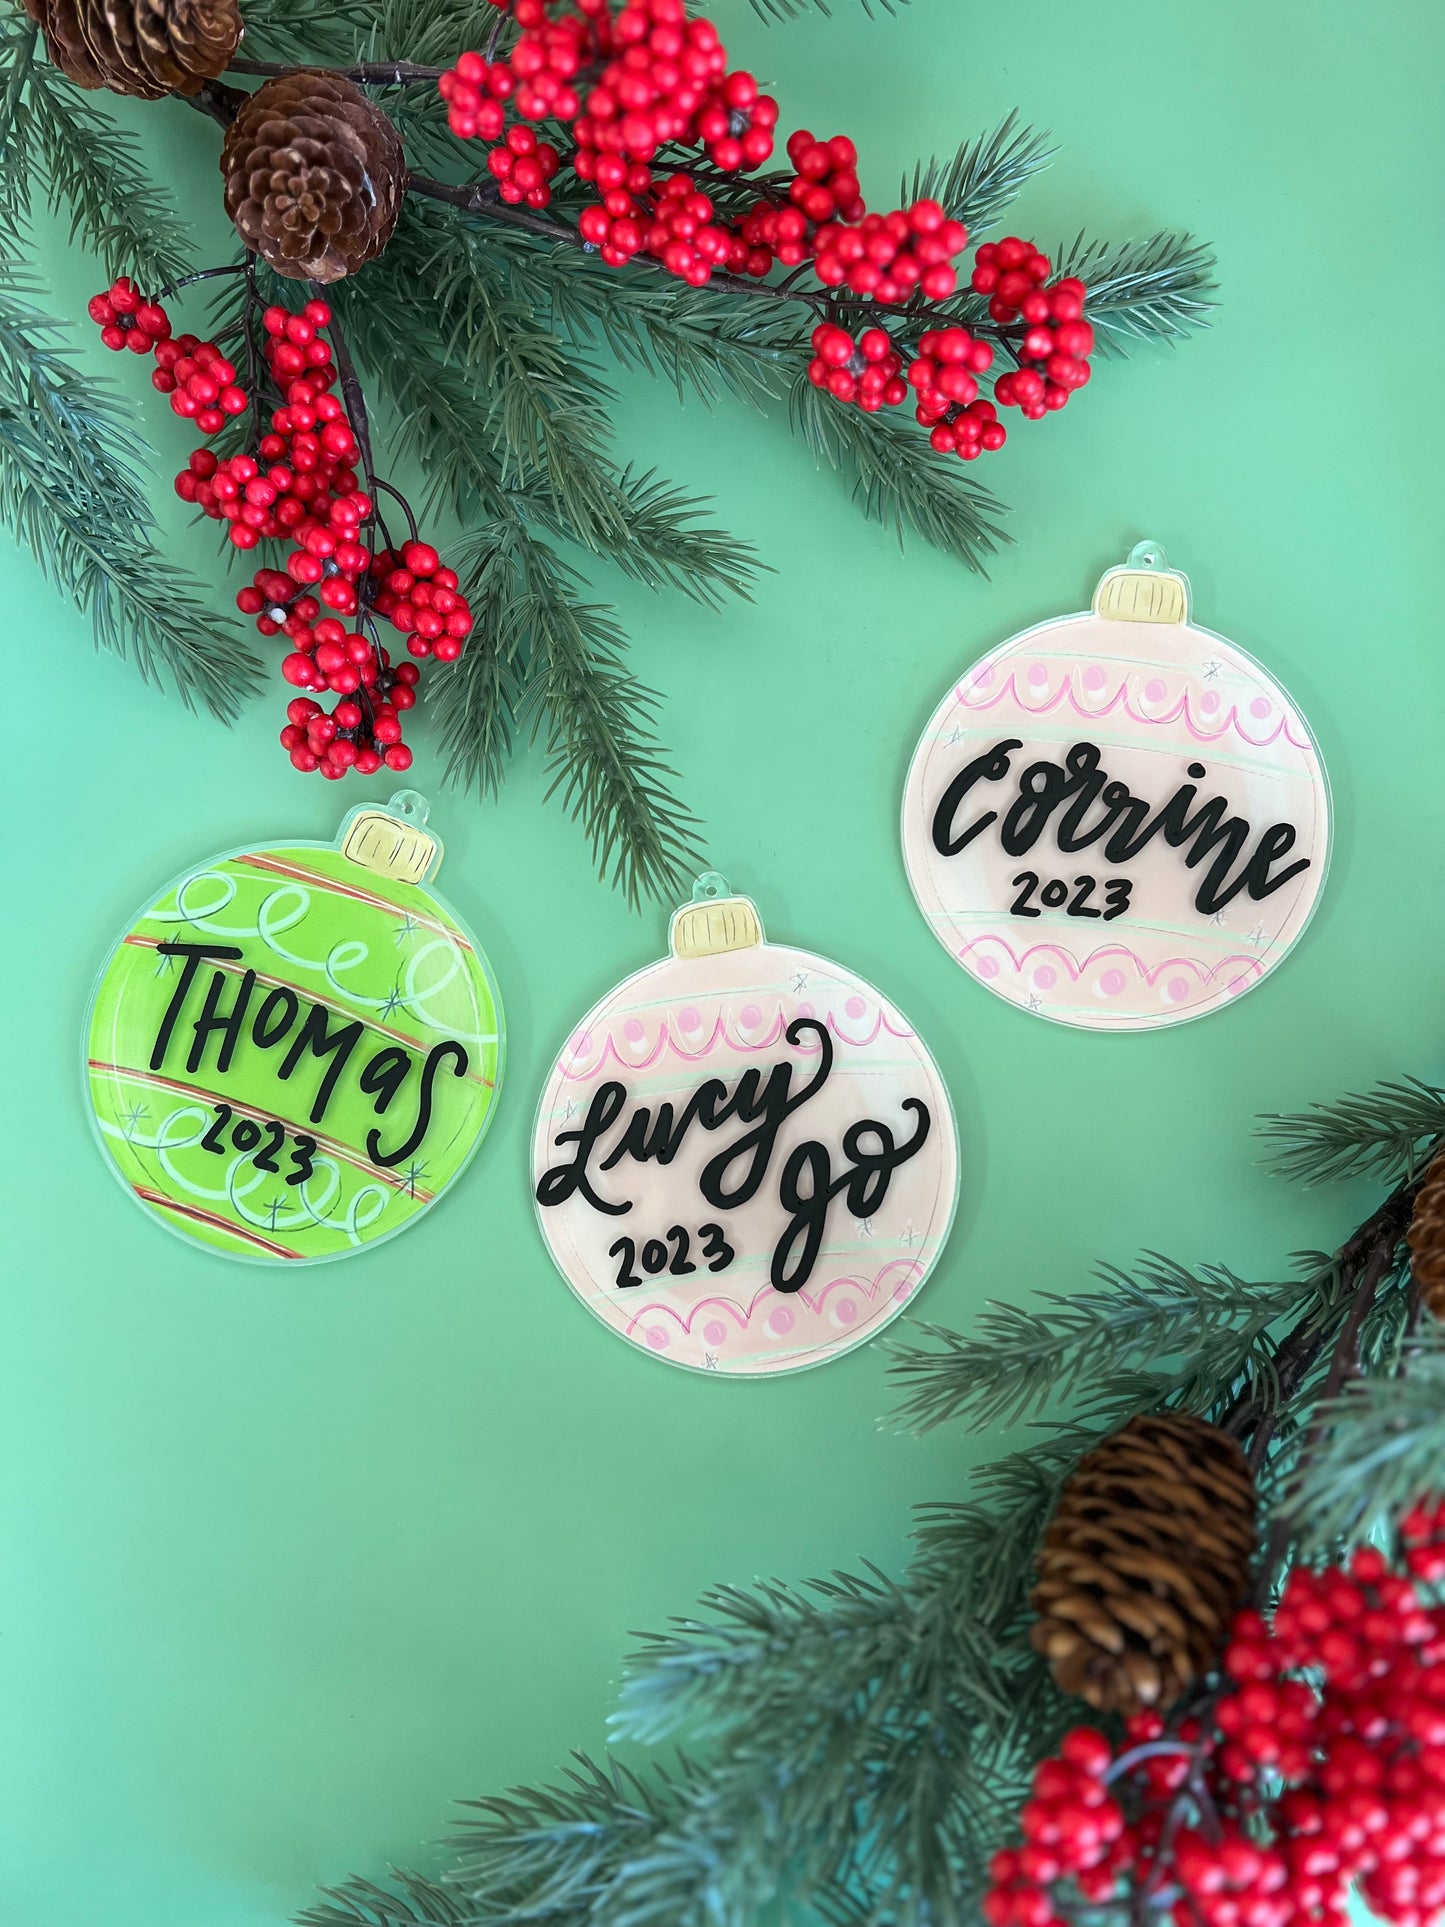 Hand lettered ornament!!